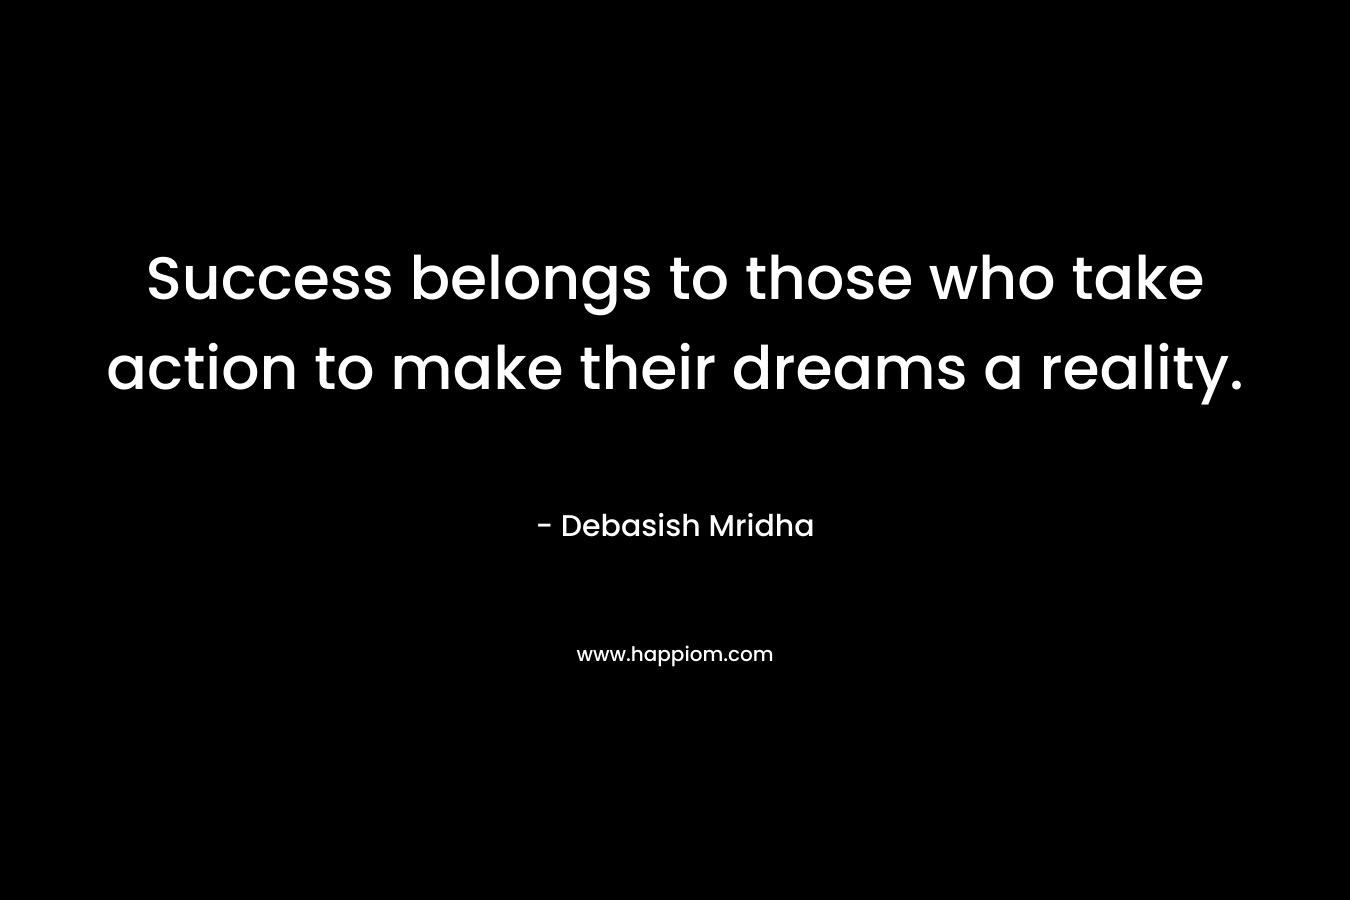 Success belongs to those who take action to make their dreams a reality.